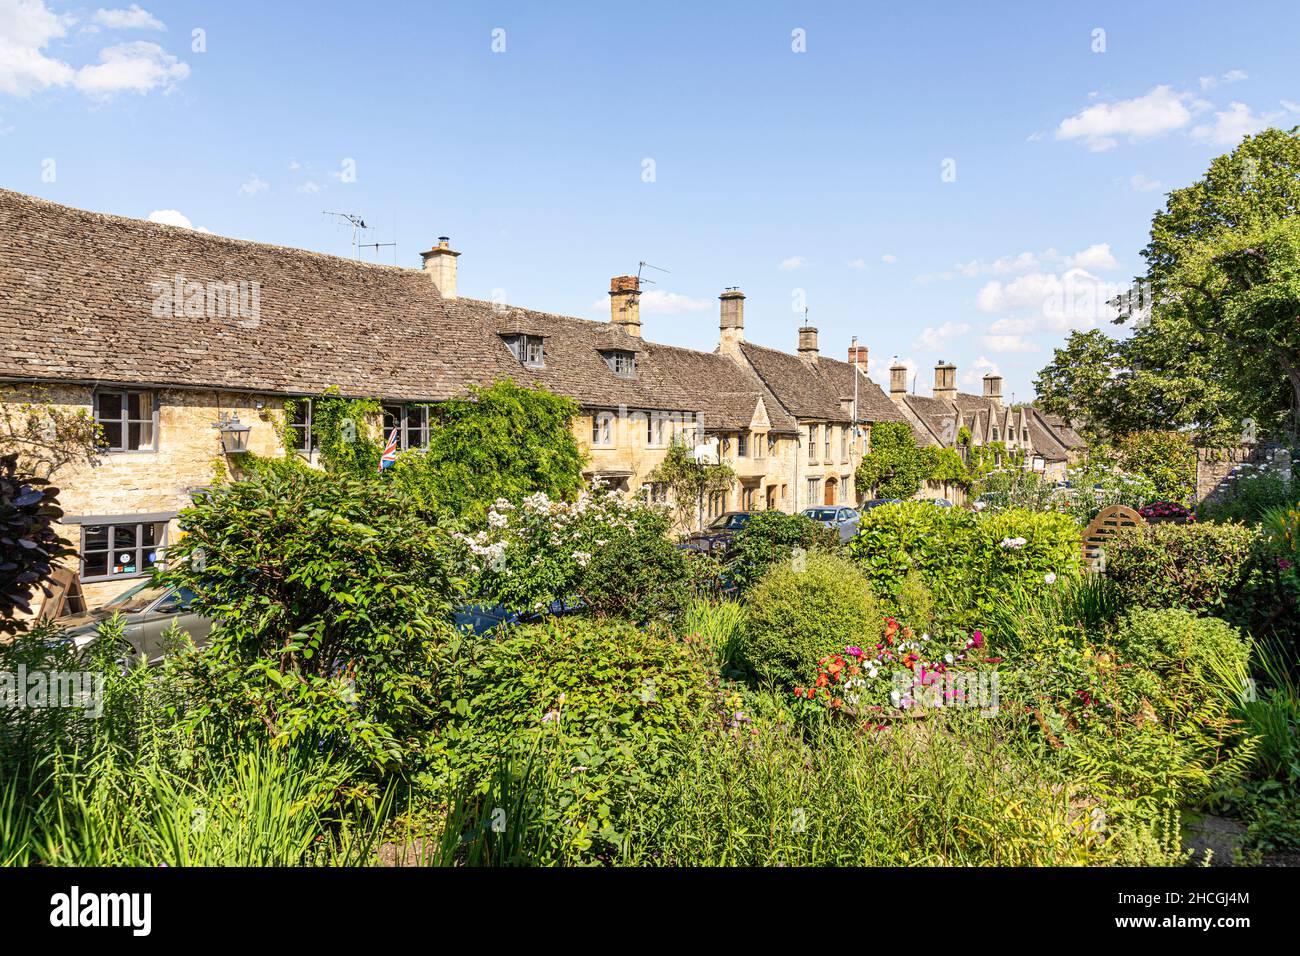 Sheep Street in the Cotswold town of Burford, Oxfordshire UK Stock Photo